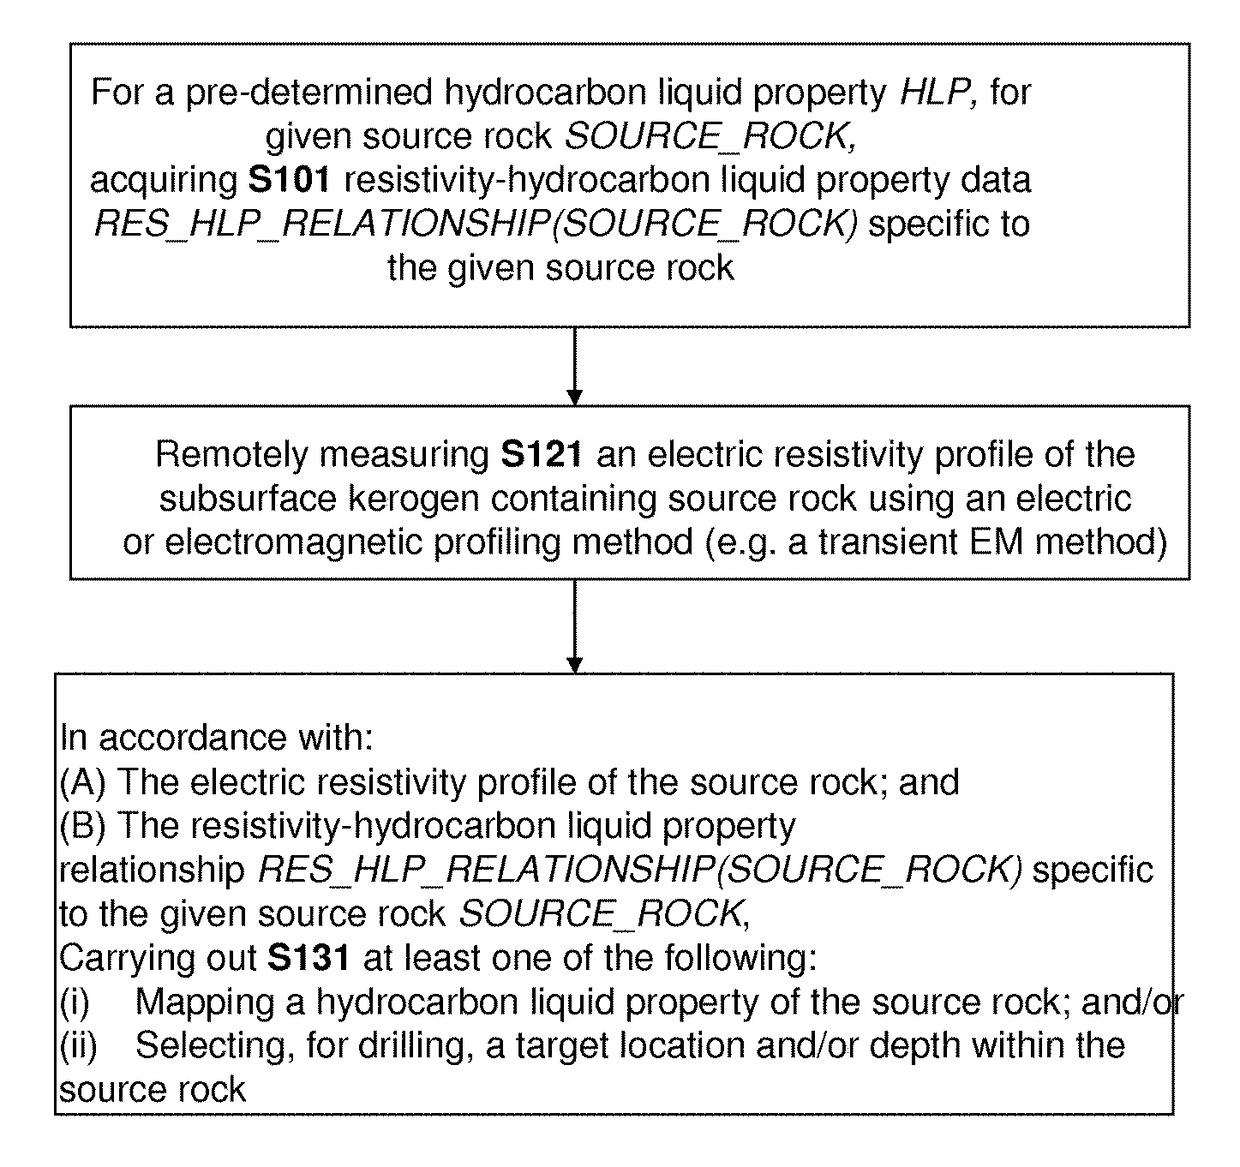 Mapping hydrocarbon liquid properties of a kerogencontaining source rock